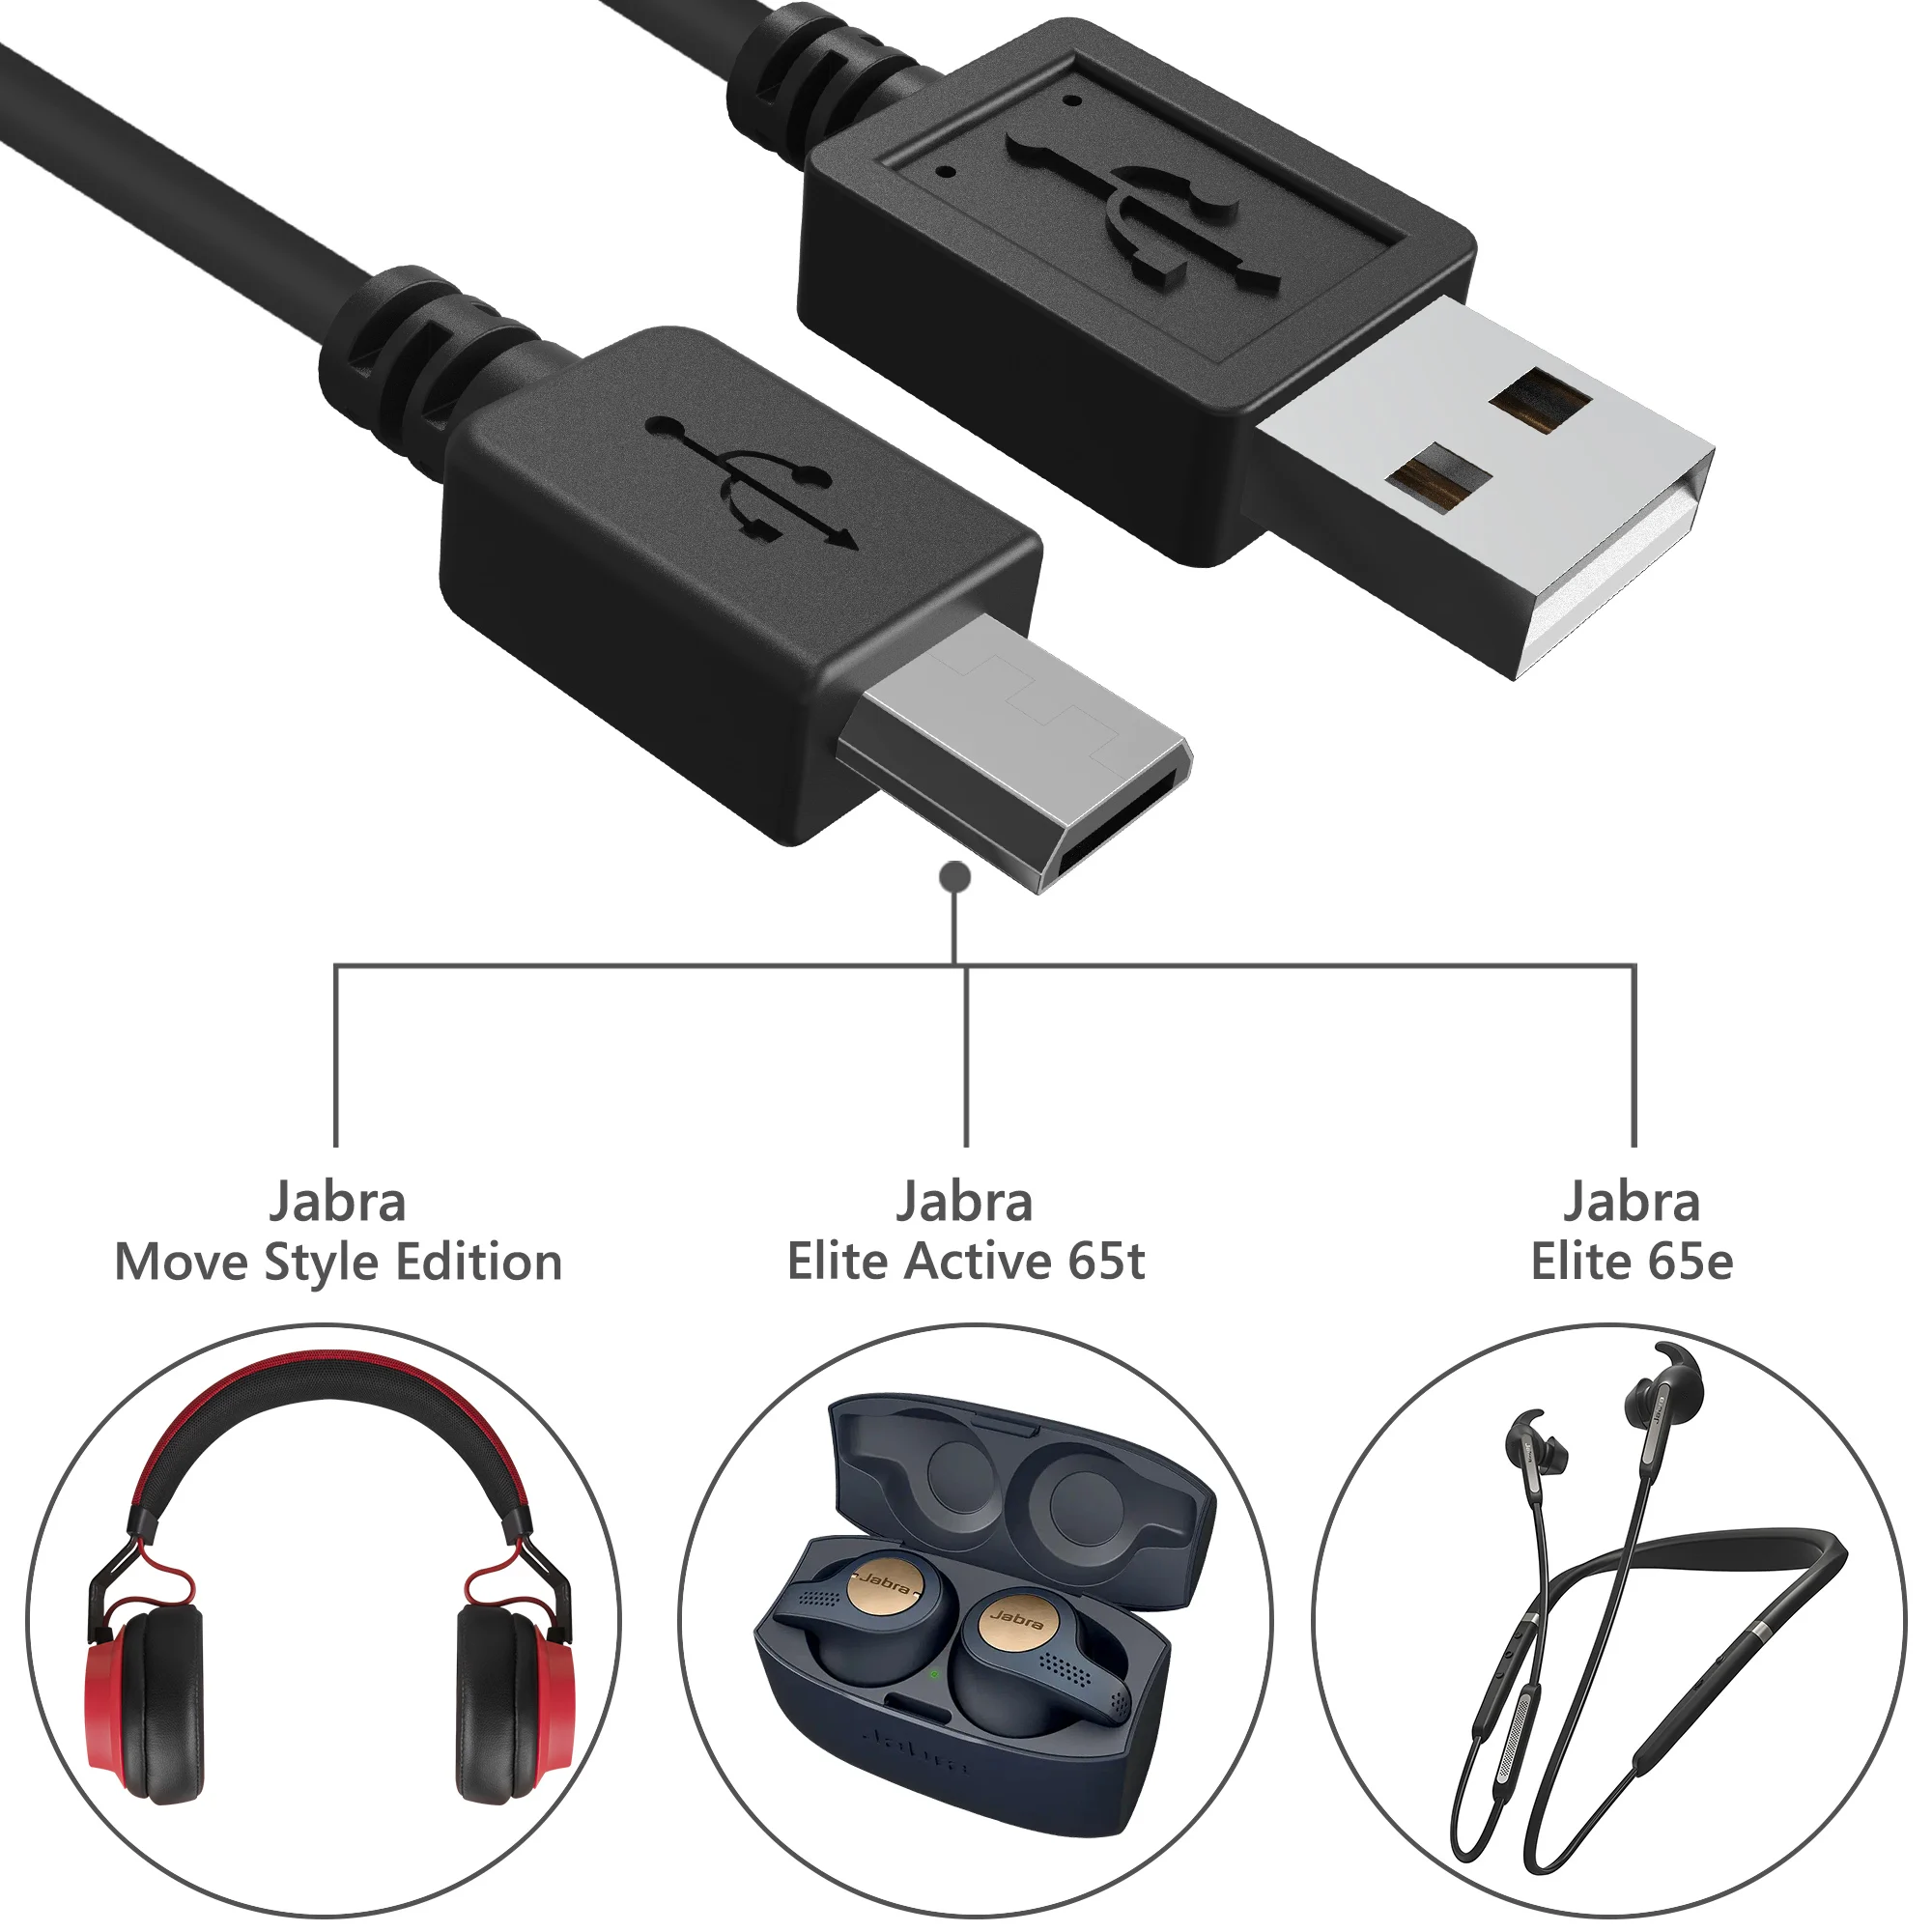 Geekria Micro-USB Headphones Short Charger Cable, Compatible with Jabra Move, Elite 65t, 65e, Elite Sport, Halo Smart Charger enlarge